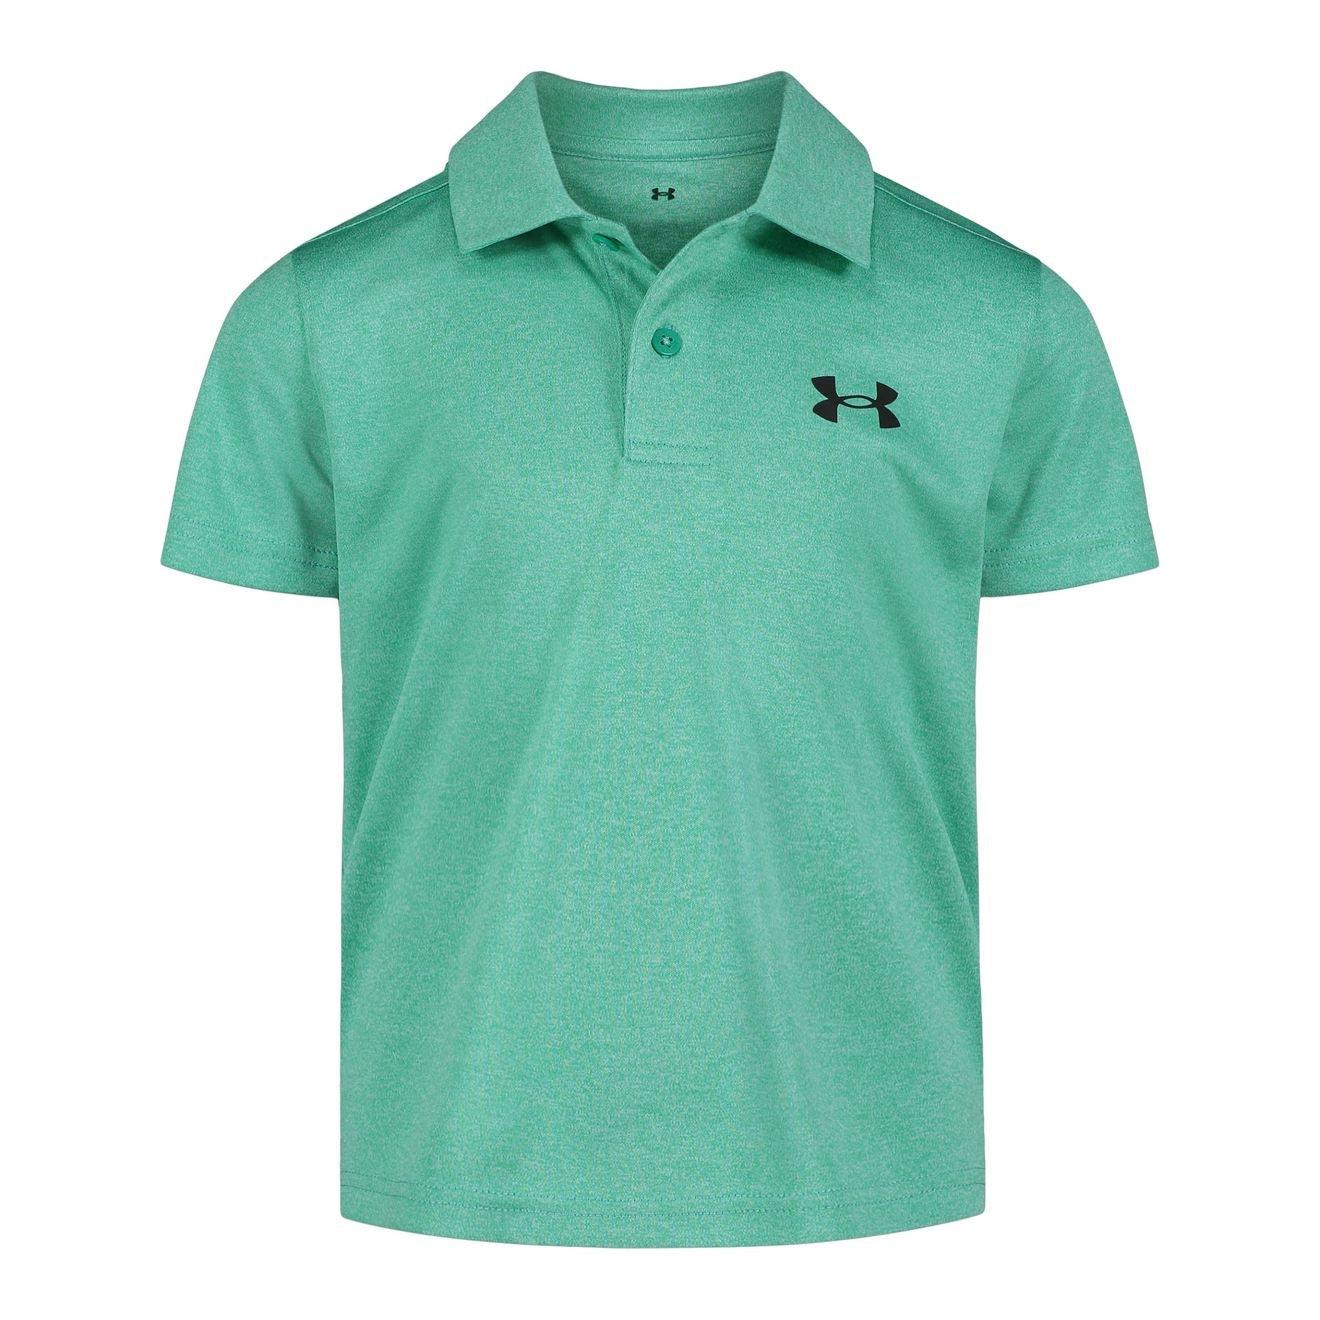 Under Armour Boys UA Match Play Twist Polo, Pre-School in Neo Turquoise